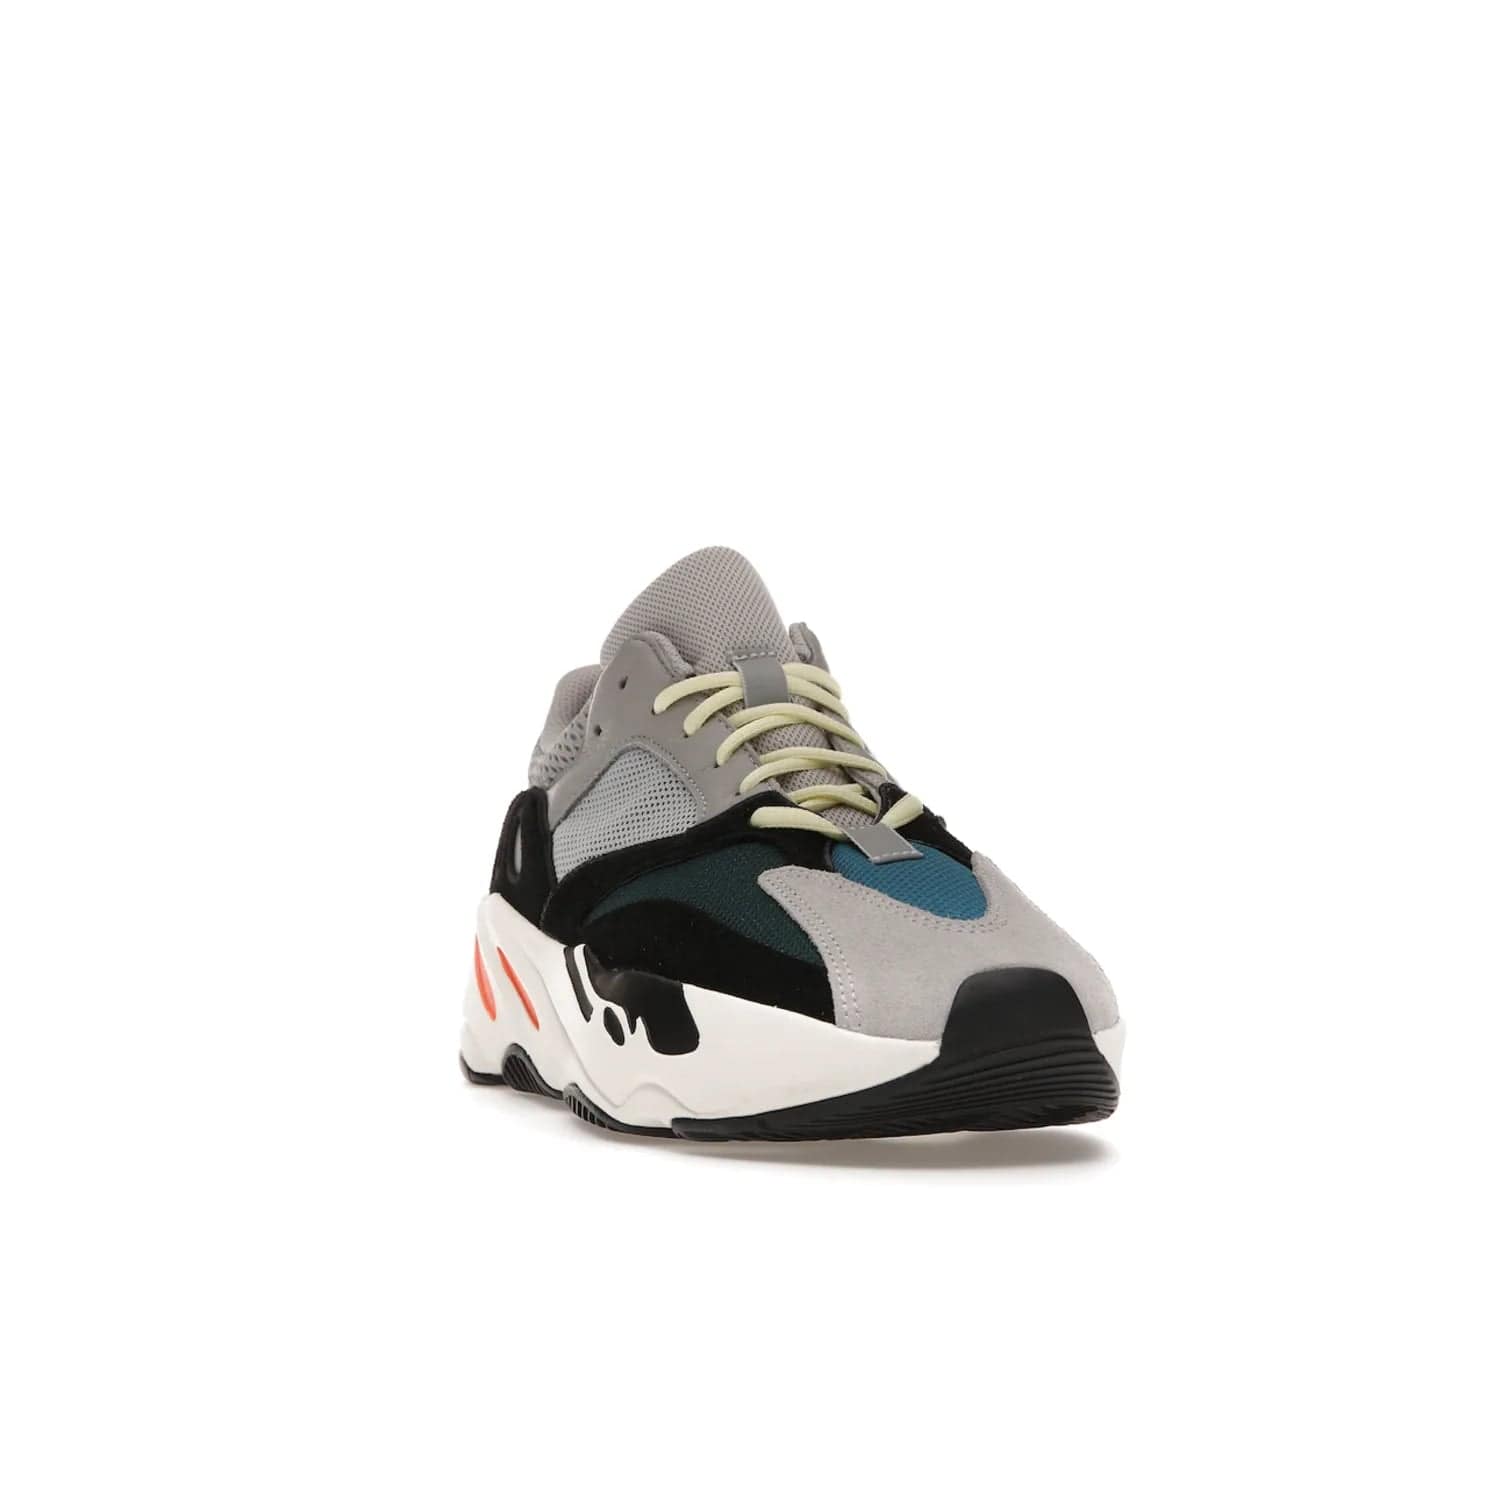 adidas Yeezy Boost 700 Wave Runner - Image 8 - Only at www.BallersClubKickz.com - Shop the iconic adidas Yeezy Boost 700 Wave Runner. Featuring grey mesh and leather upper, black suede overlays, teal mesh underlays, and signature Boost sole. Be bold & make a statement.